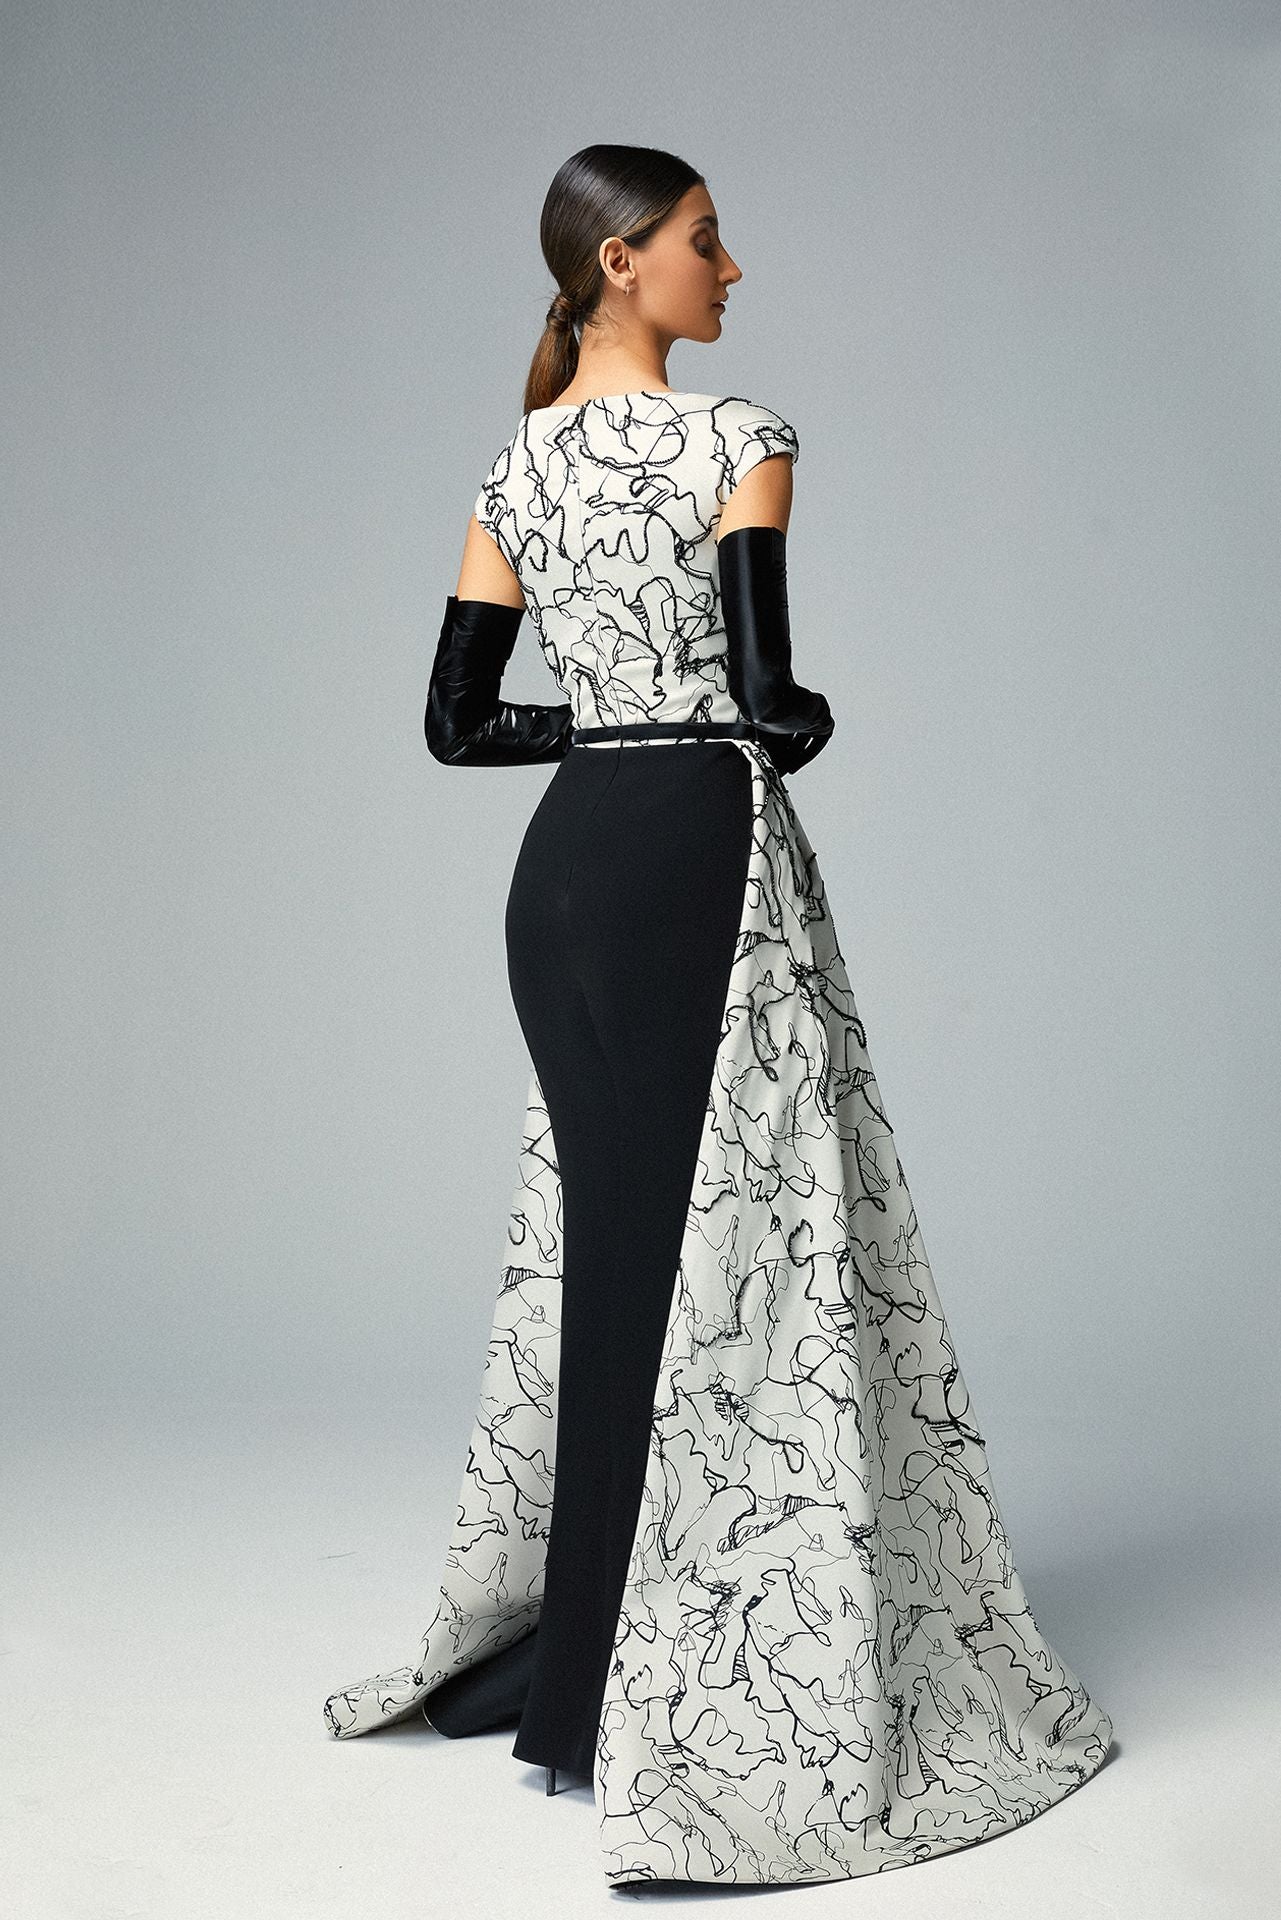 Load image into Gallery viewer, Embroidered Ivory-black Jacquard Evening Dress, Black Latex Gloves and Over-skirt
